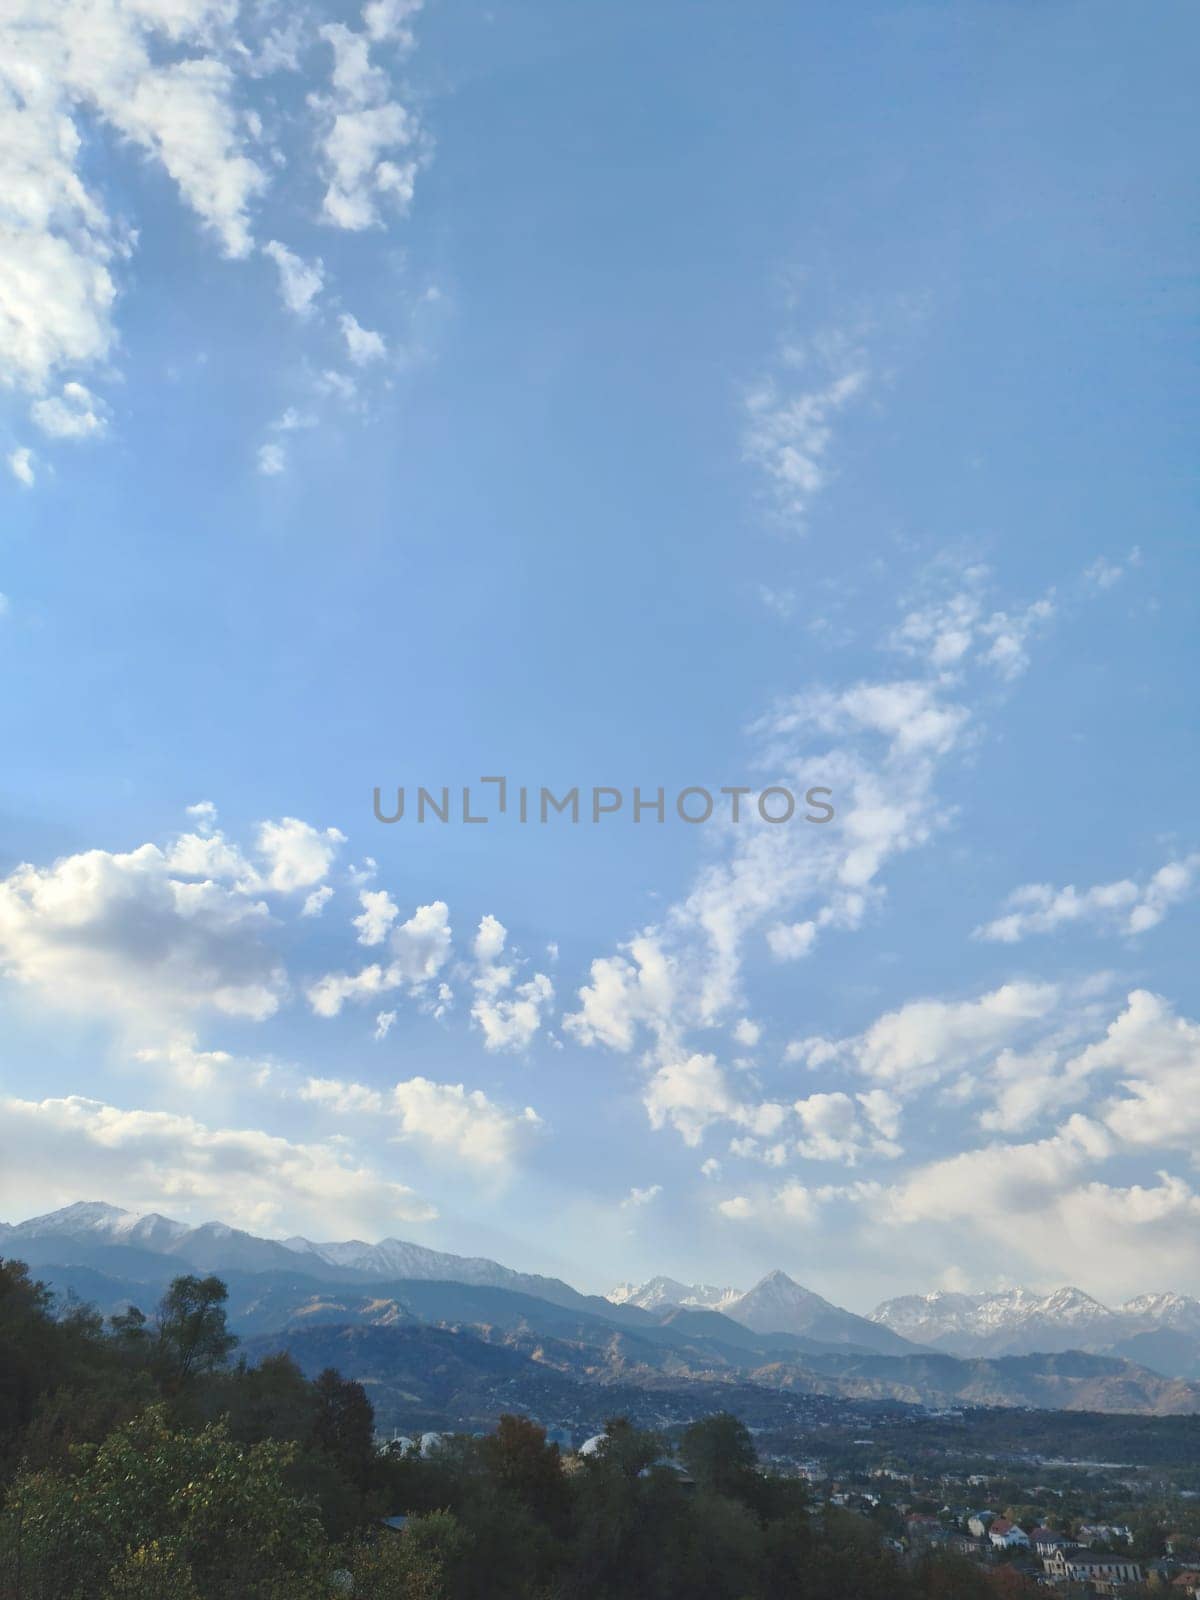 Natural vertical landscape with a clear blue sky filled with fluffy white cumulus clouds, showcasing a stunning ecoregion of highland grasslands and majestic Almaty mountains in the background.